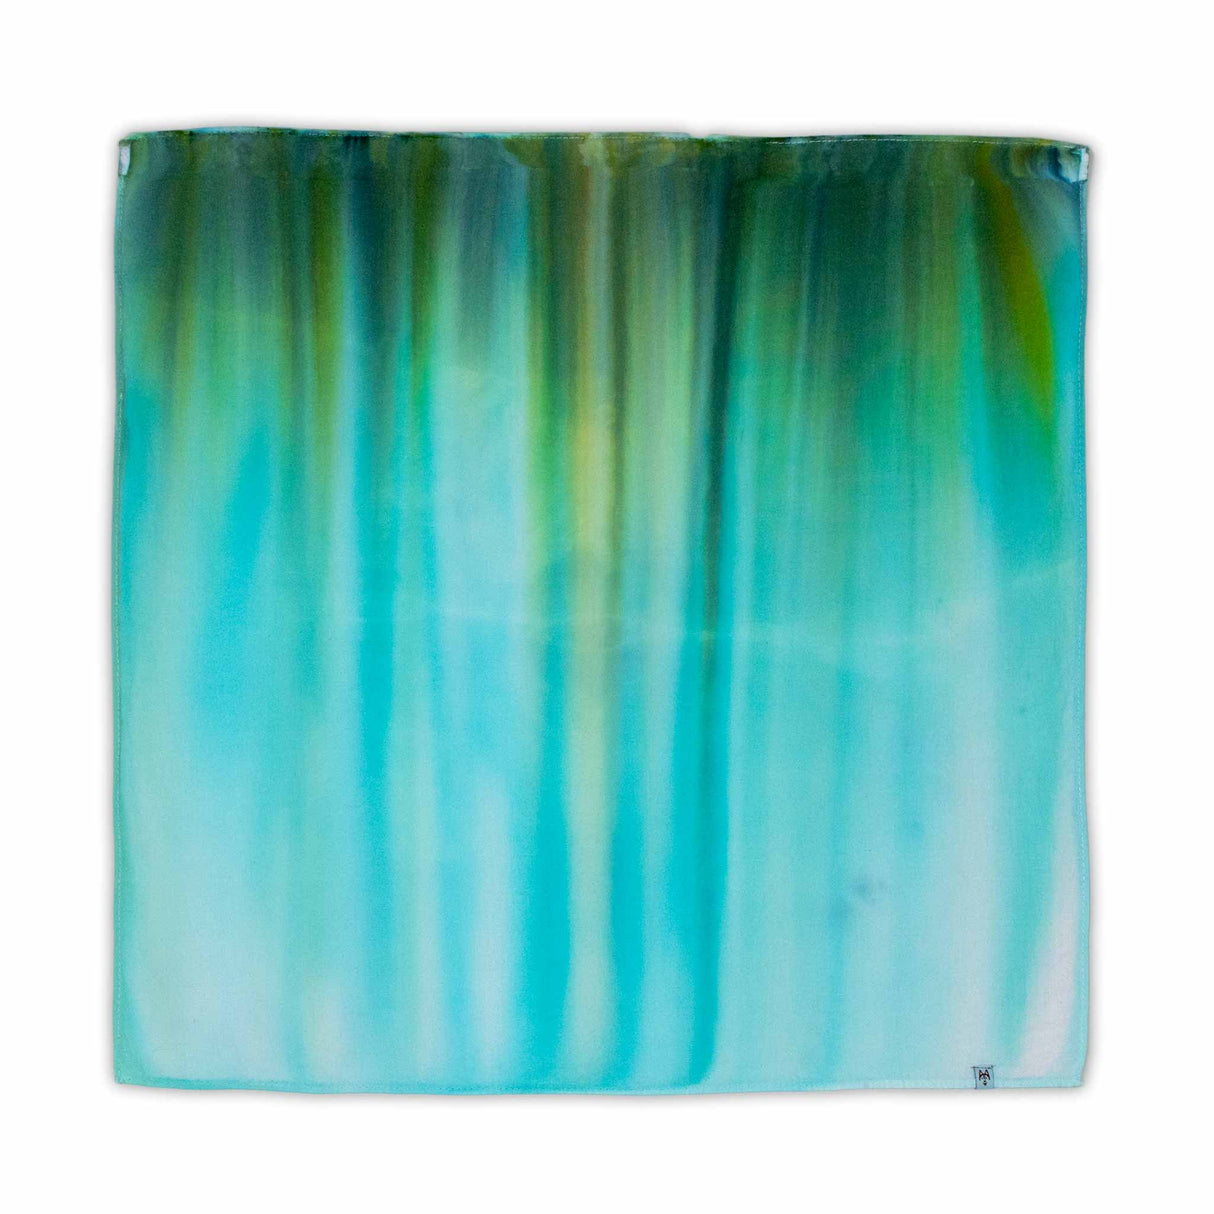 A handcrafted bandana with a distinctive ice dye pattern, where the blues and greens merge to evoke the tranquil beauty of the Aurora Borealis.